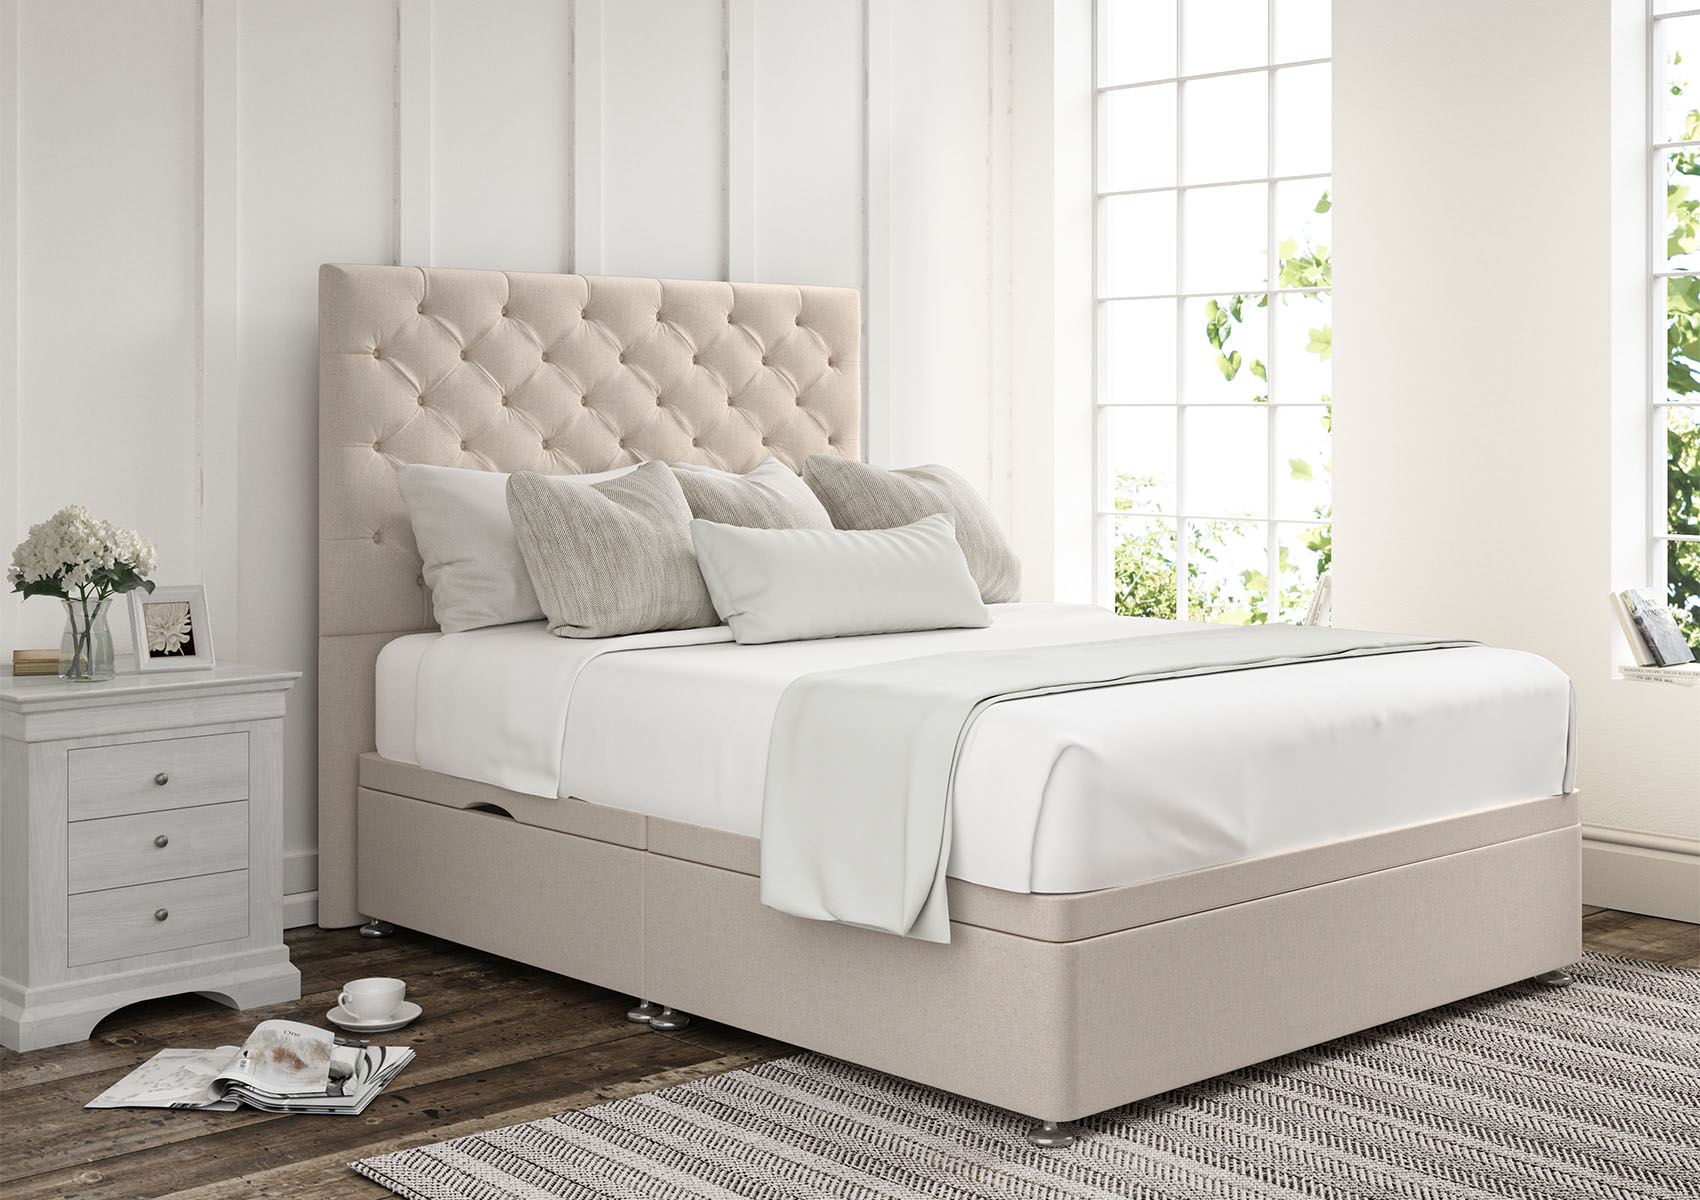 View Chesterfield Teddy Cream Upholstered King Size Ottoman Bed Time4Sleep information